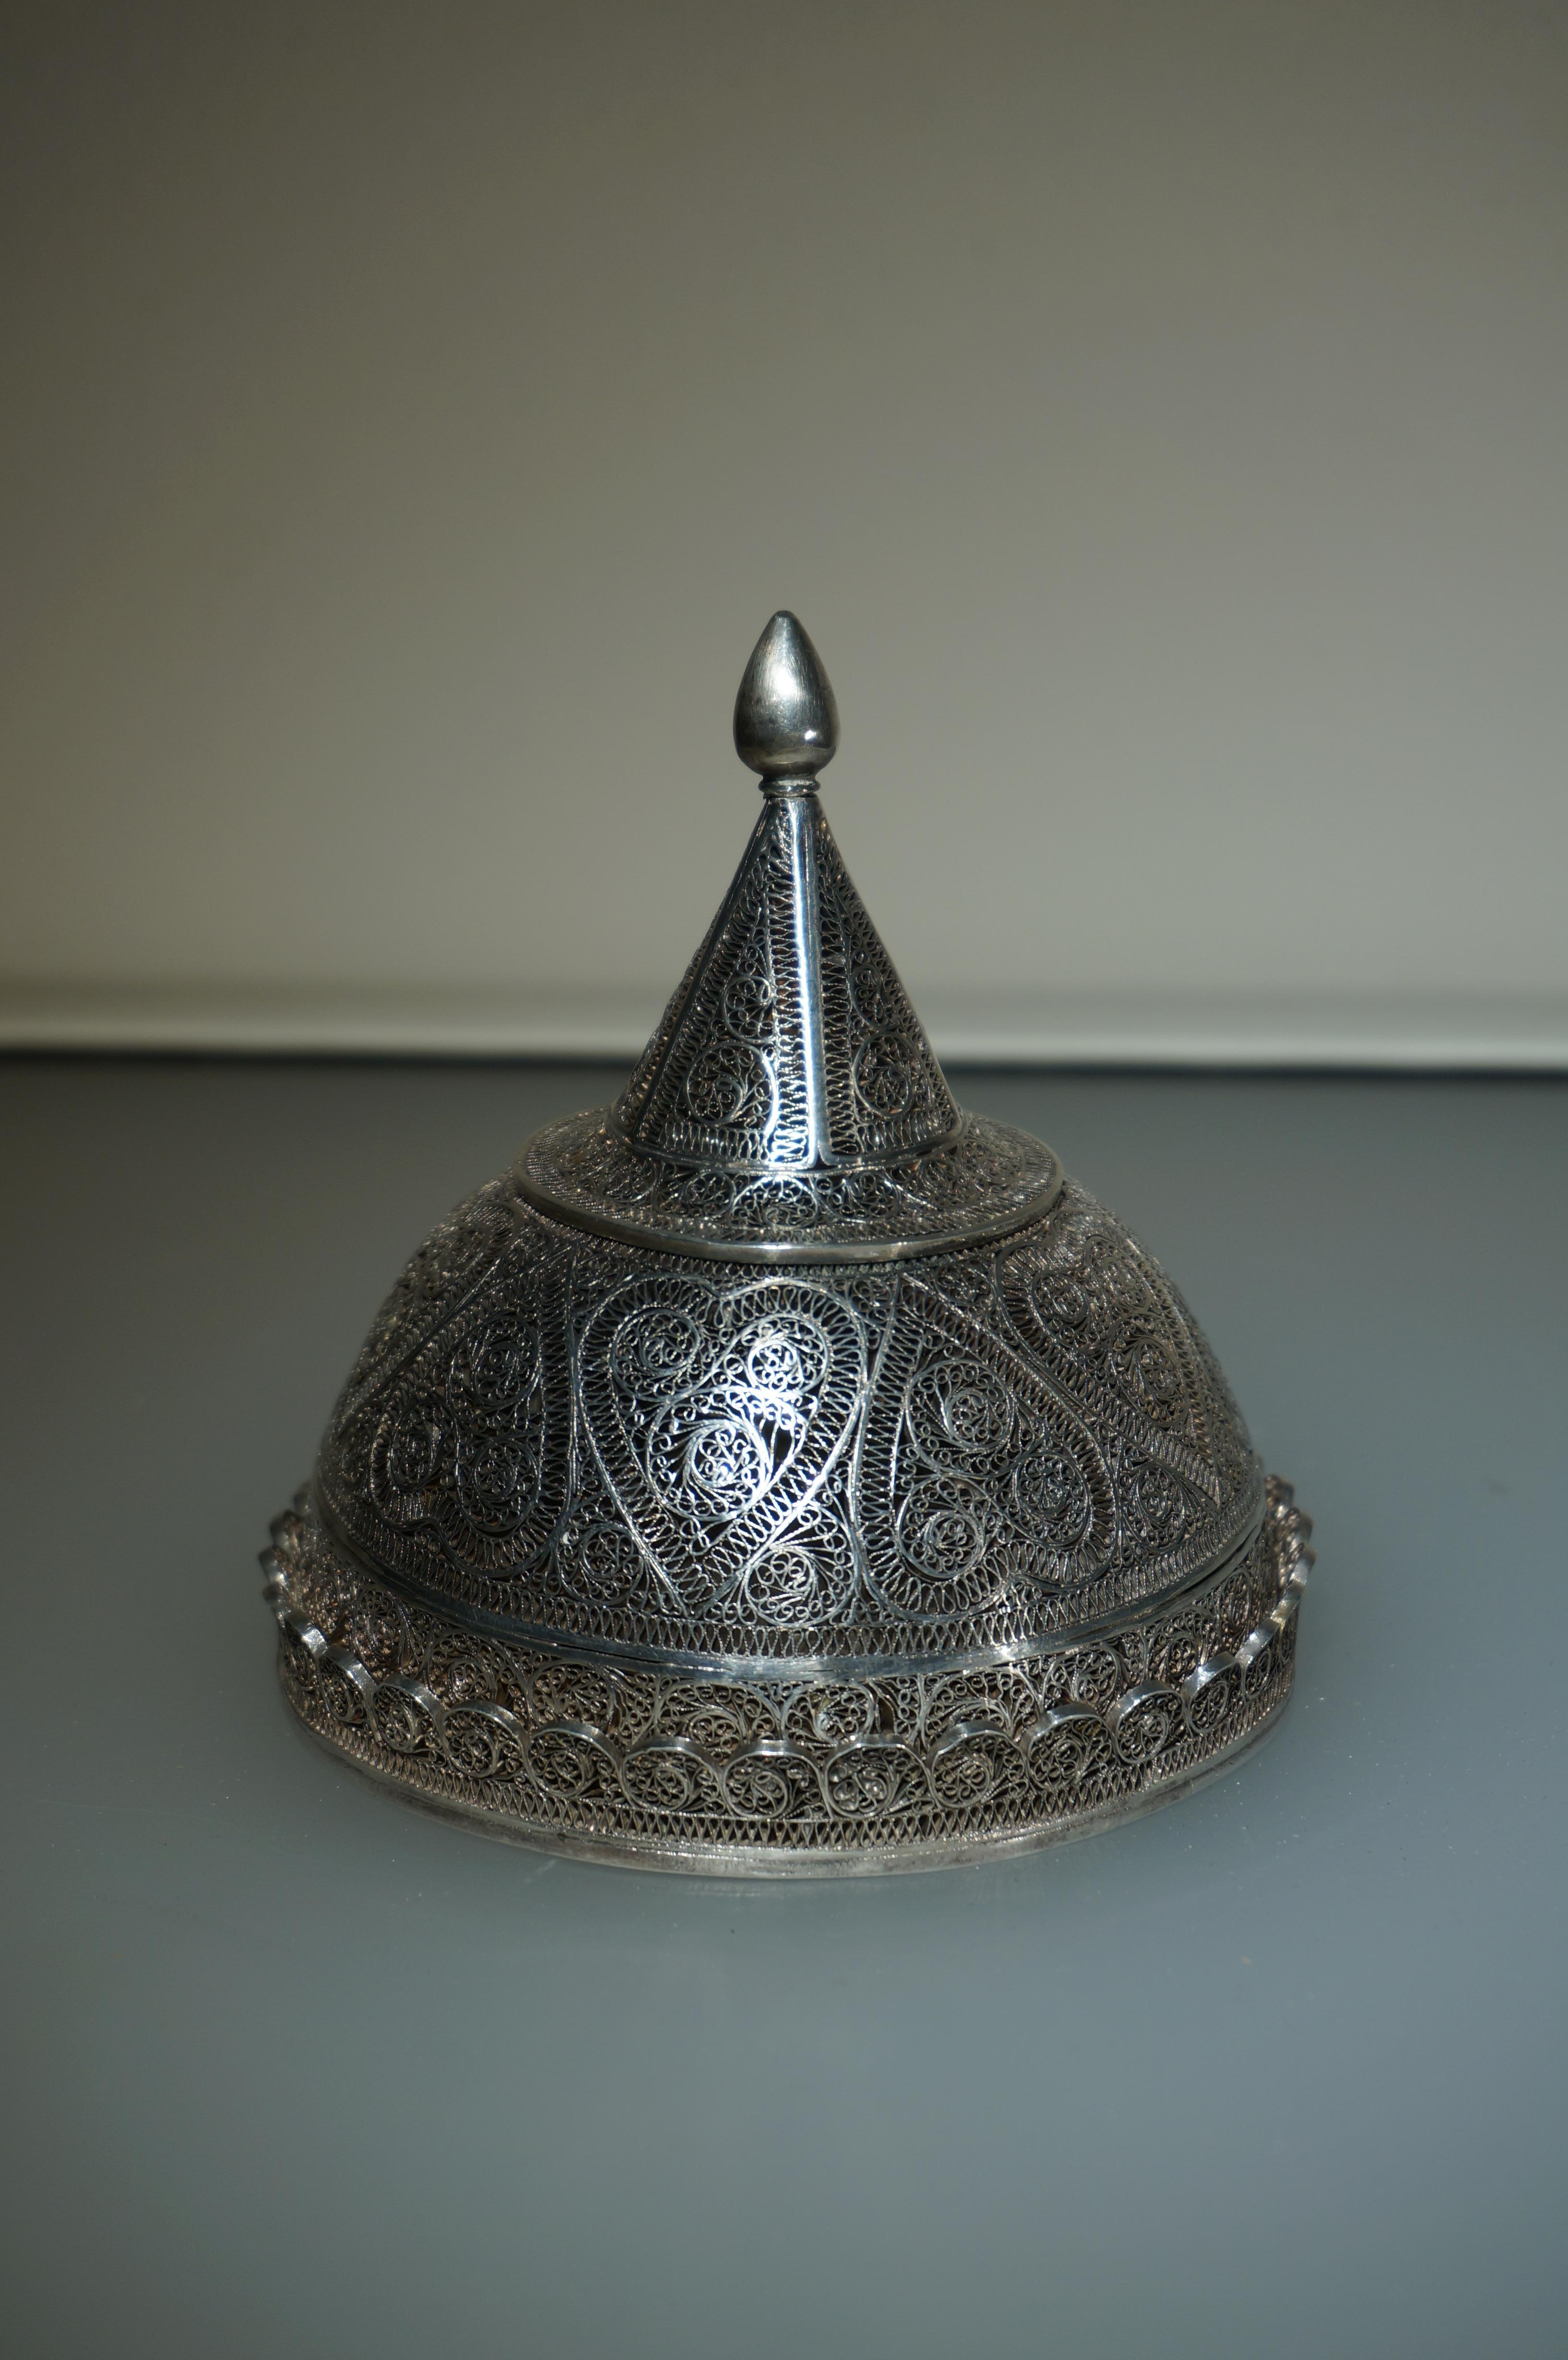 Rare type of domed filigree silver box with a scent bottle inside (top can be screwed off).
Presumably used as a spice/perfume box.

Presumably made in Karimnagar, India, early 19th century.

Dimensions approx. (h.)11 x (w.) 11,5 cm.
Unmarked,